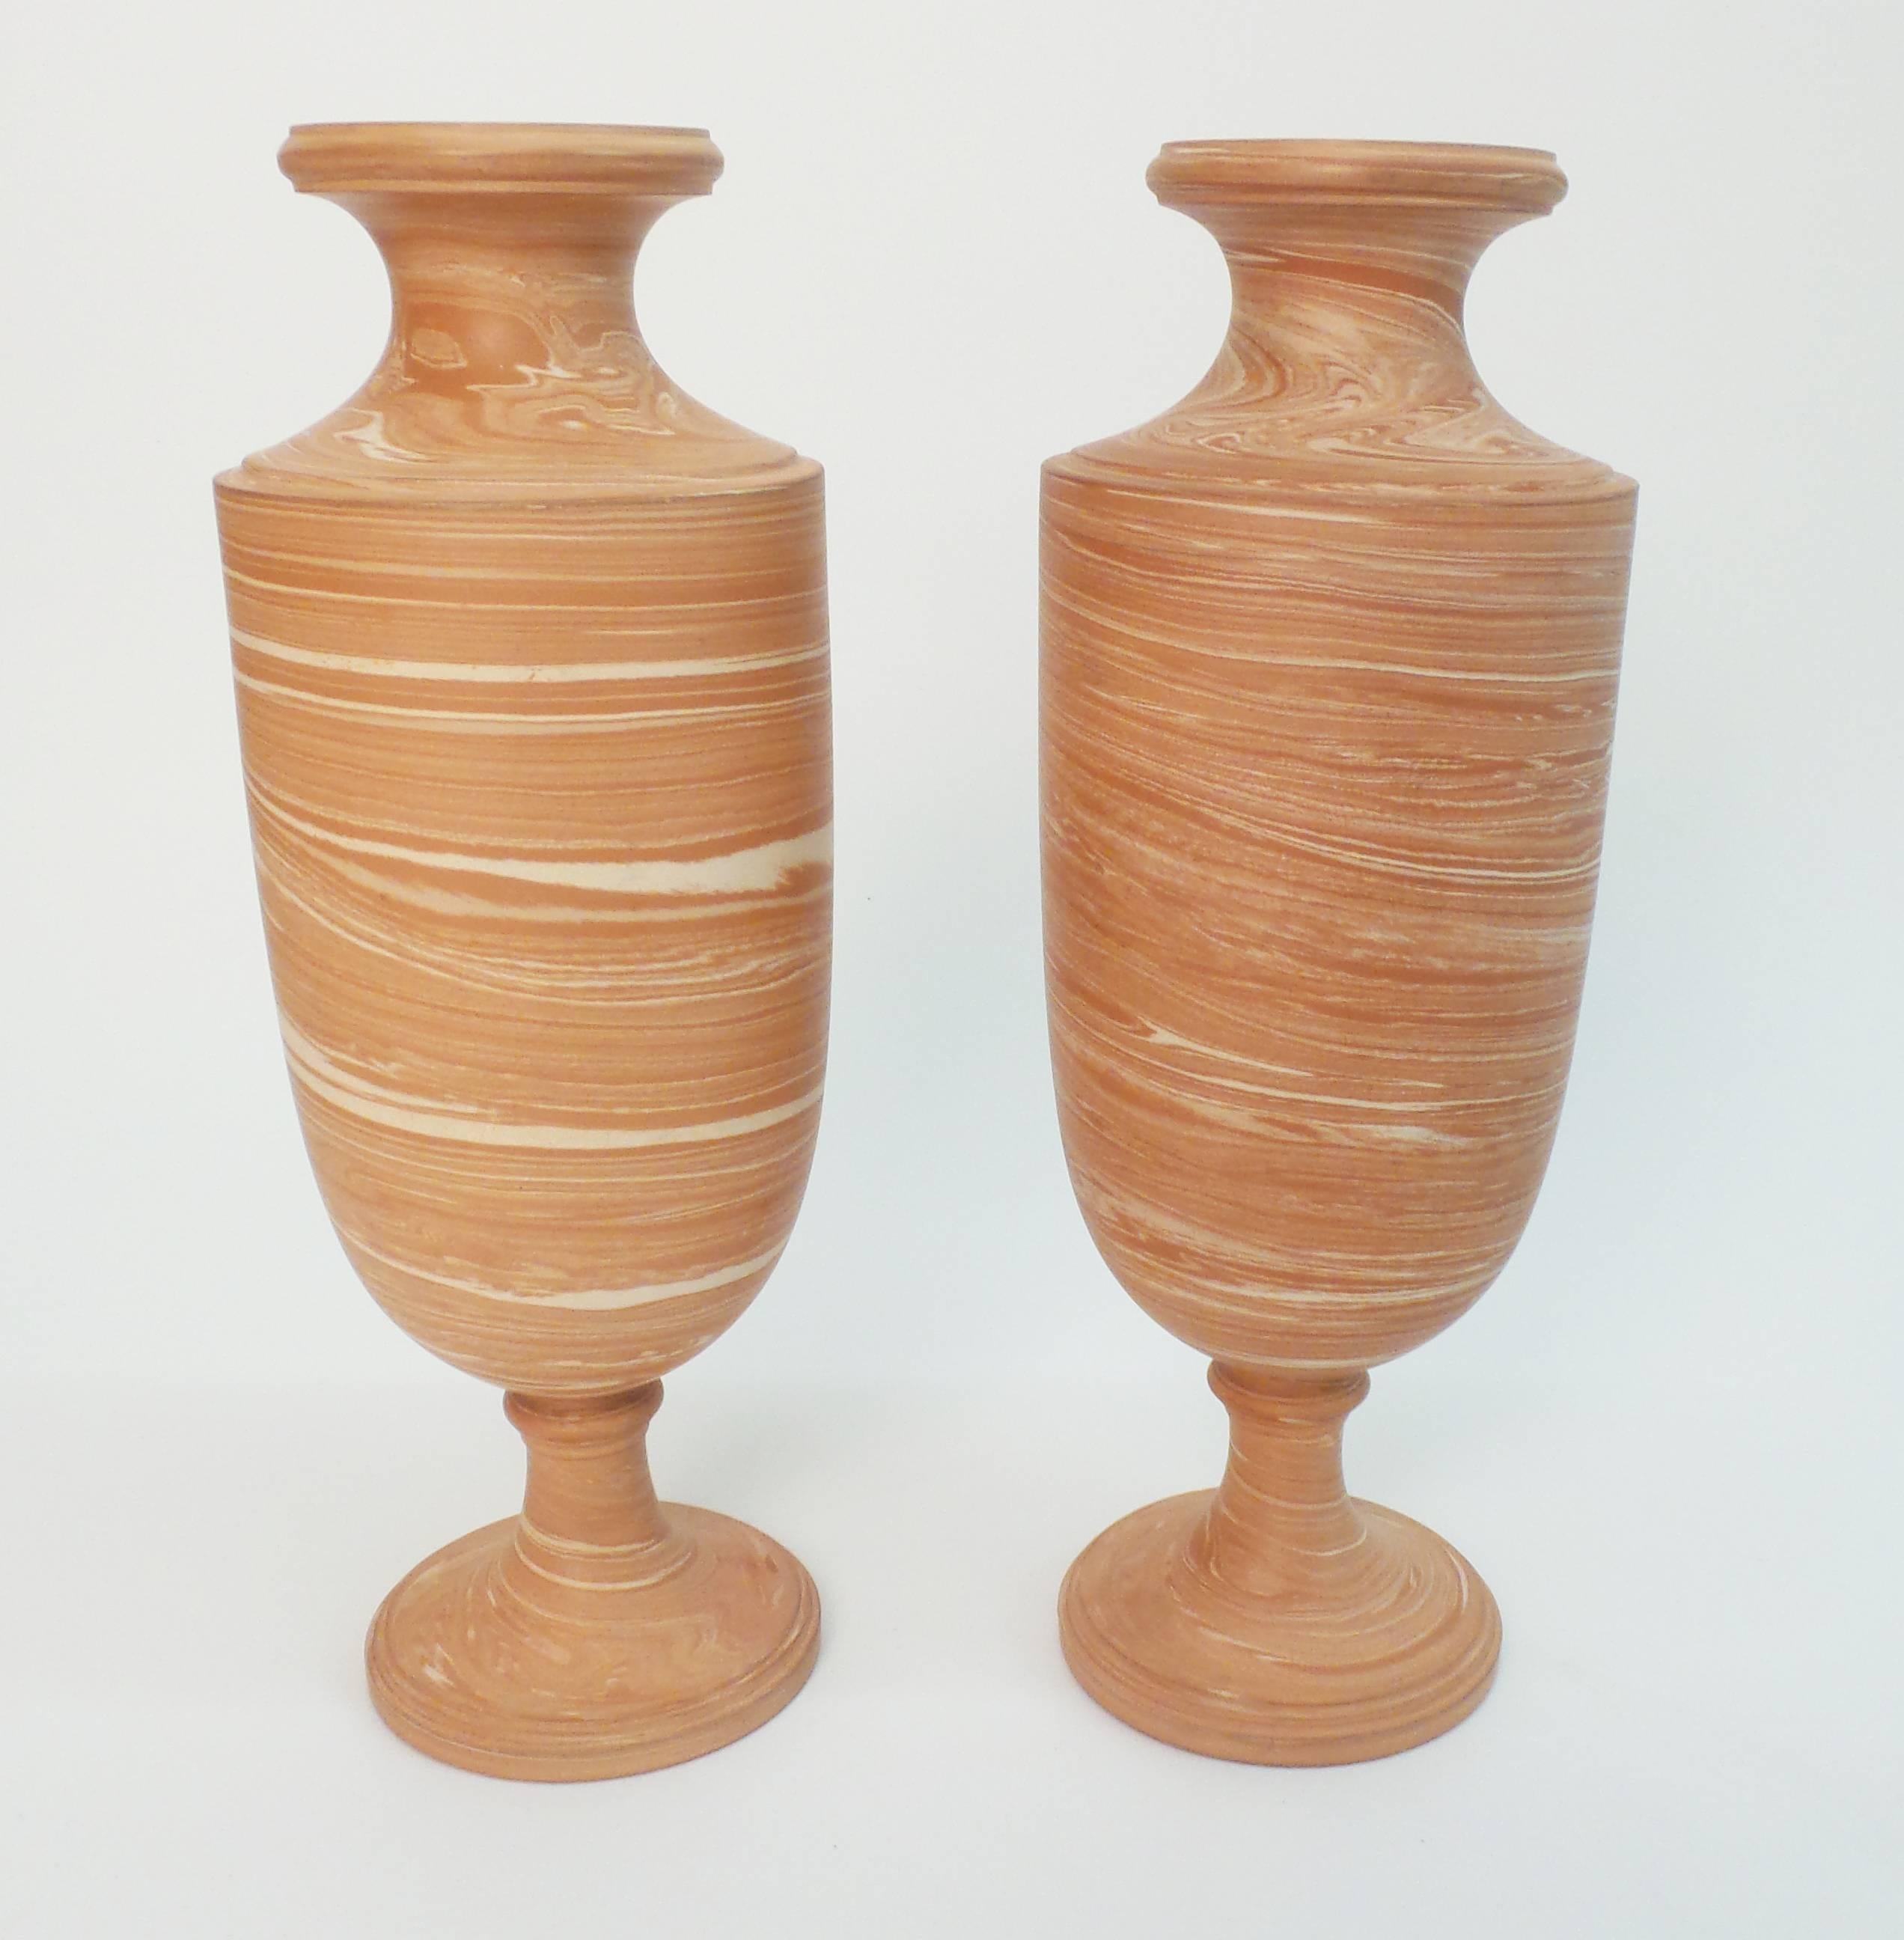 A pair of English marbleized pottery vases of classical form. The Brian Rose model. Torquay factory. Impressed mark.